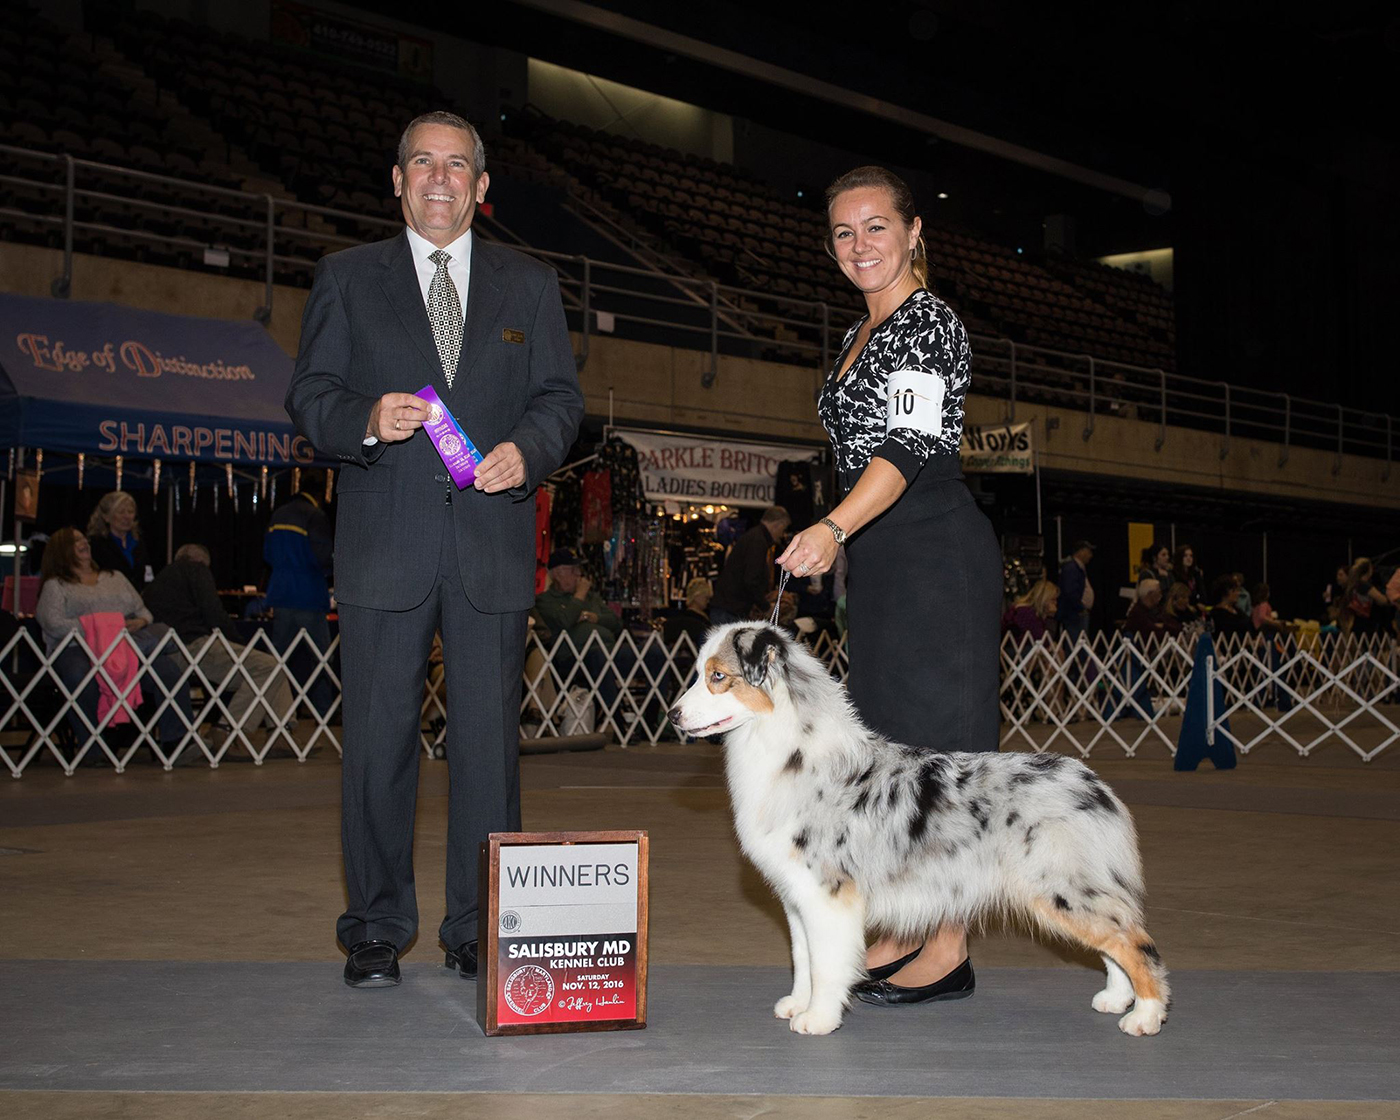 AKC CH Oakhurst Arborview Spice Girl of Collinswood "Posh"